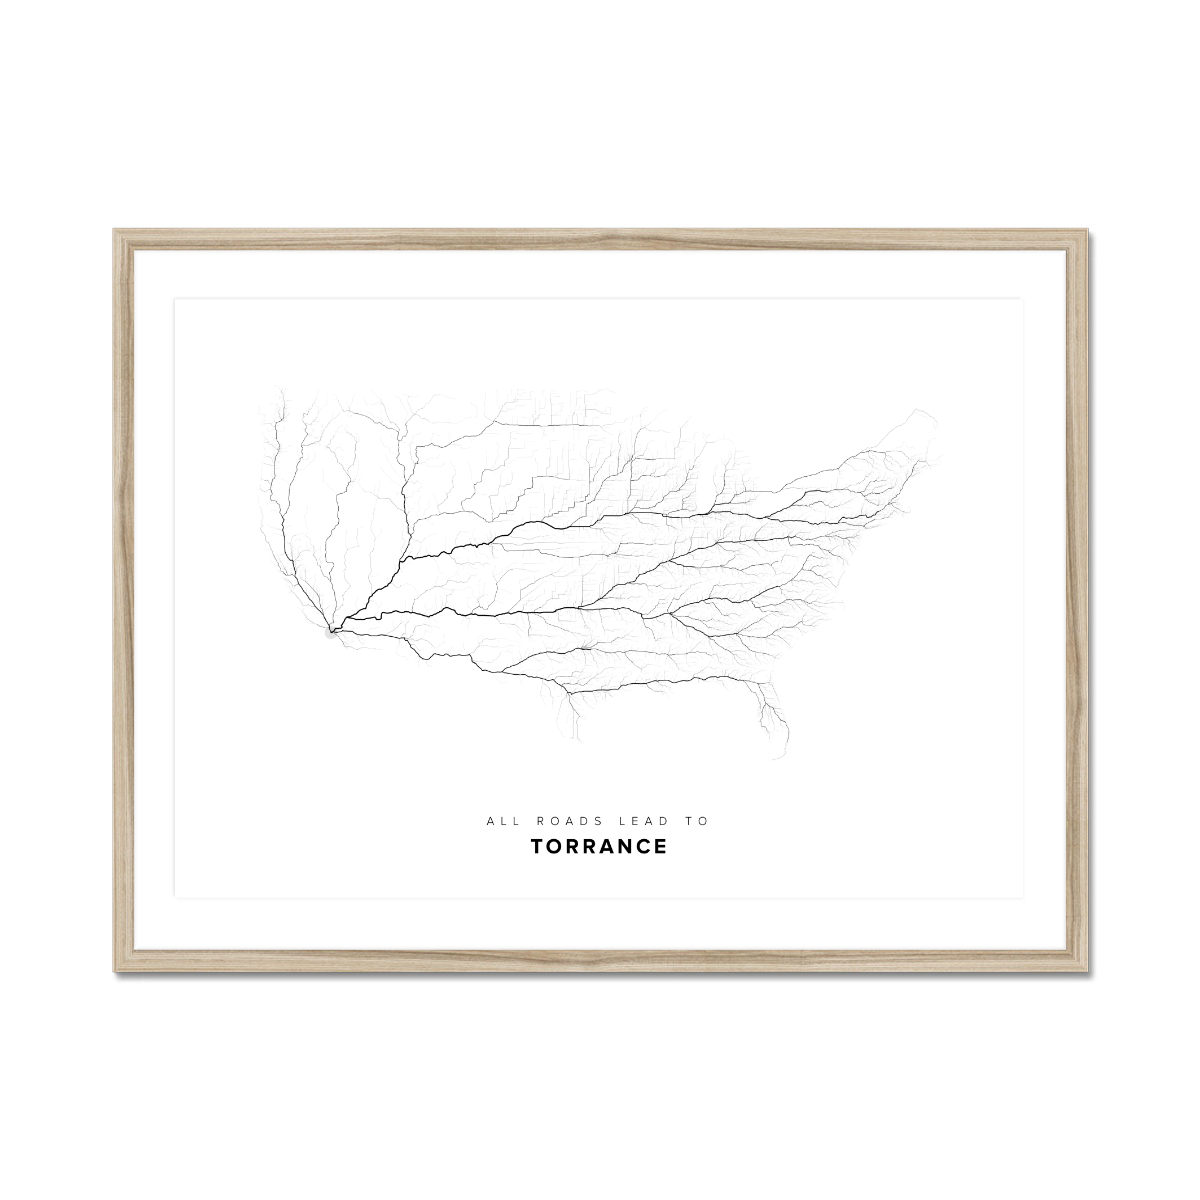 All roads lead to Torrance (United States of America) Fine Art Map Print